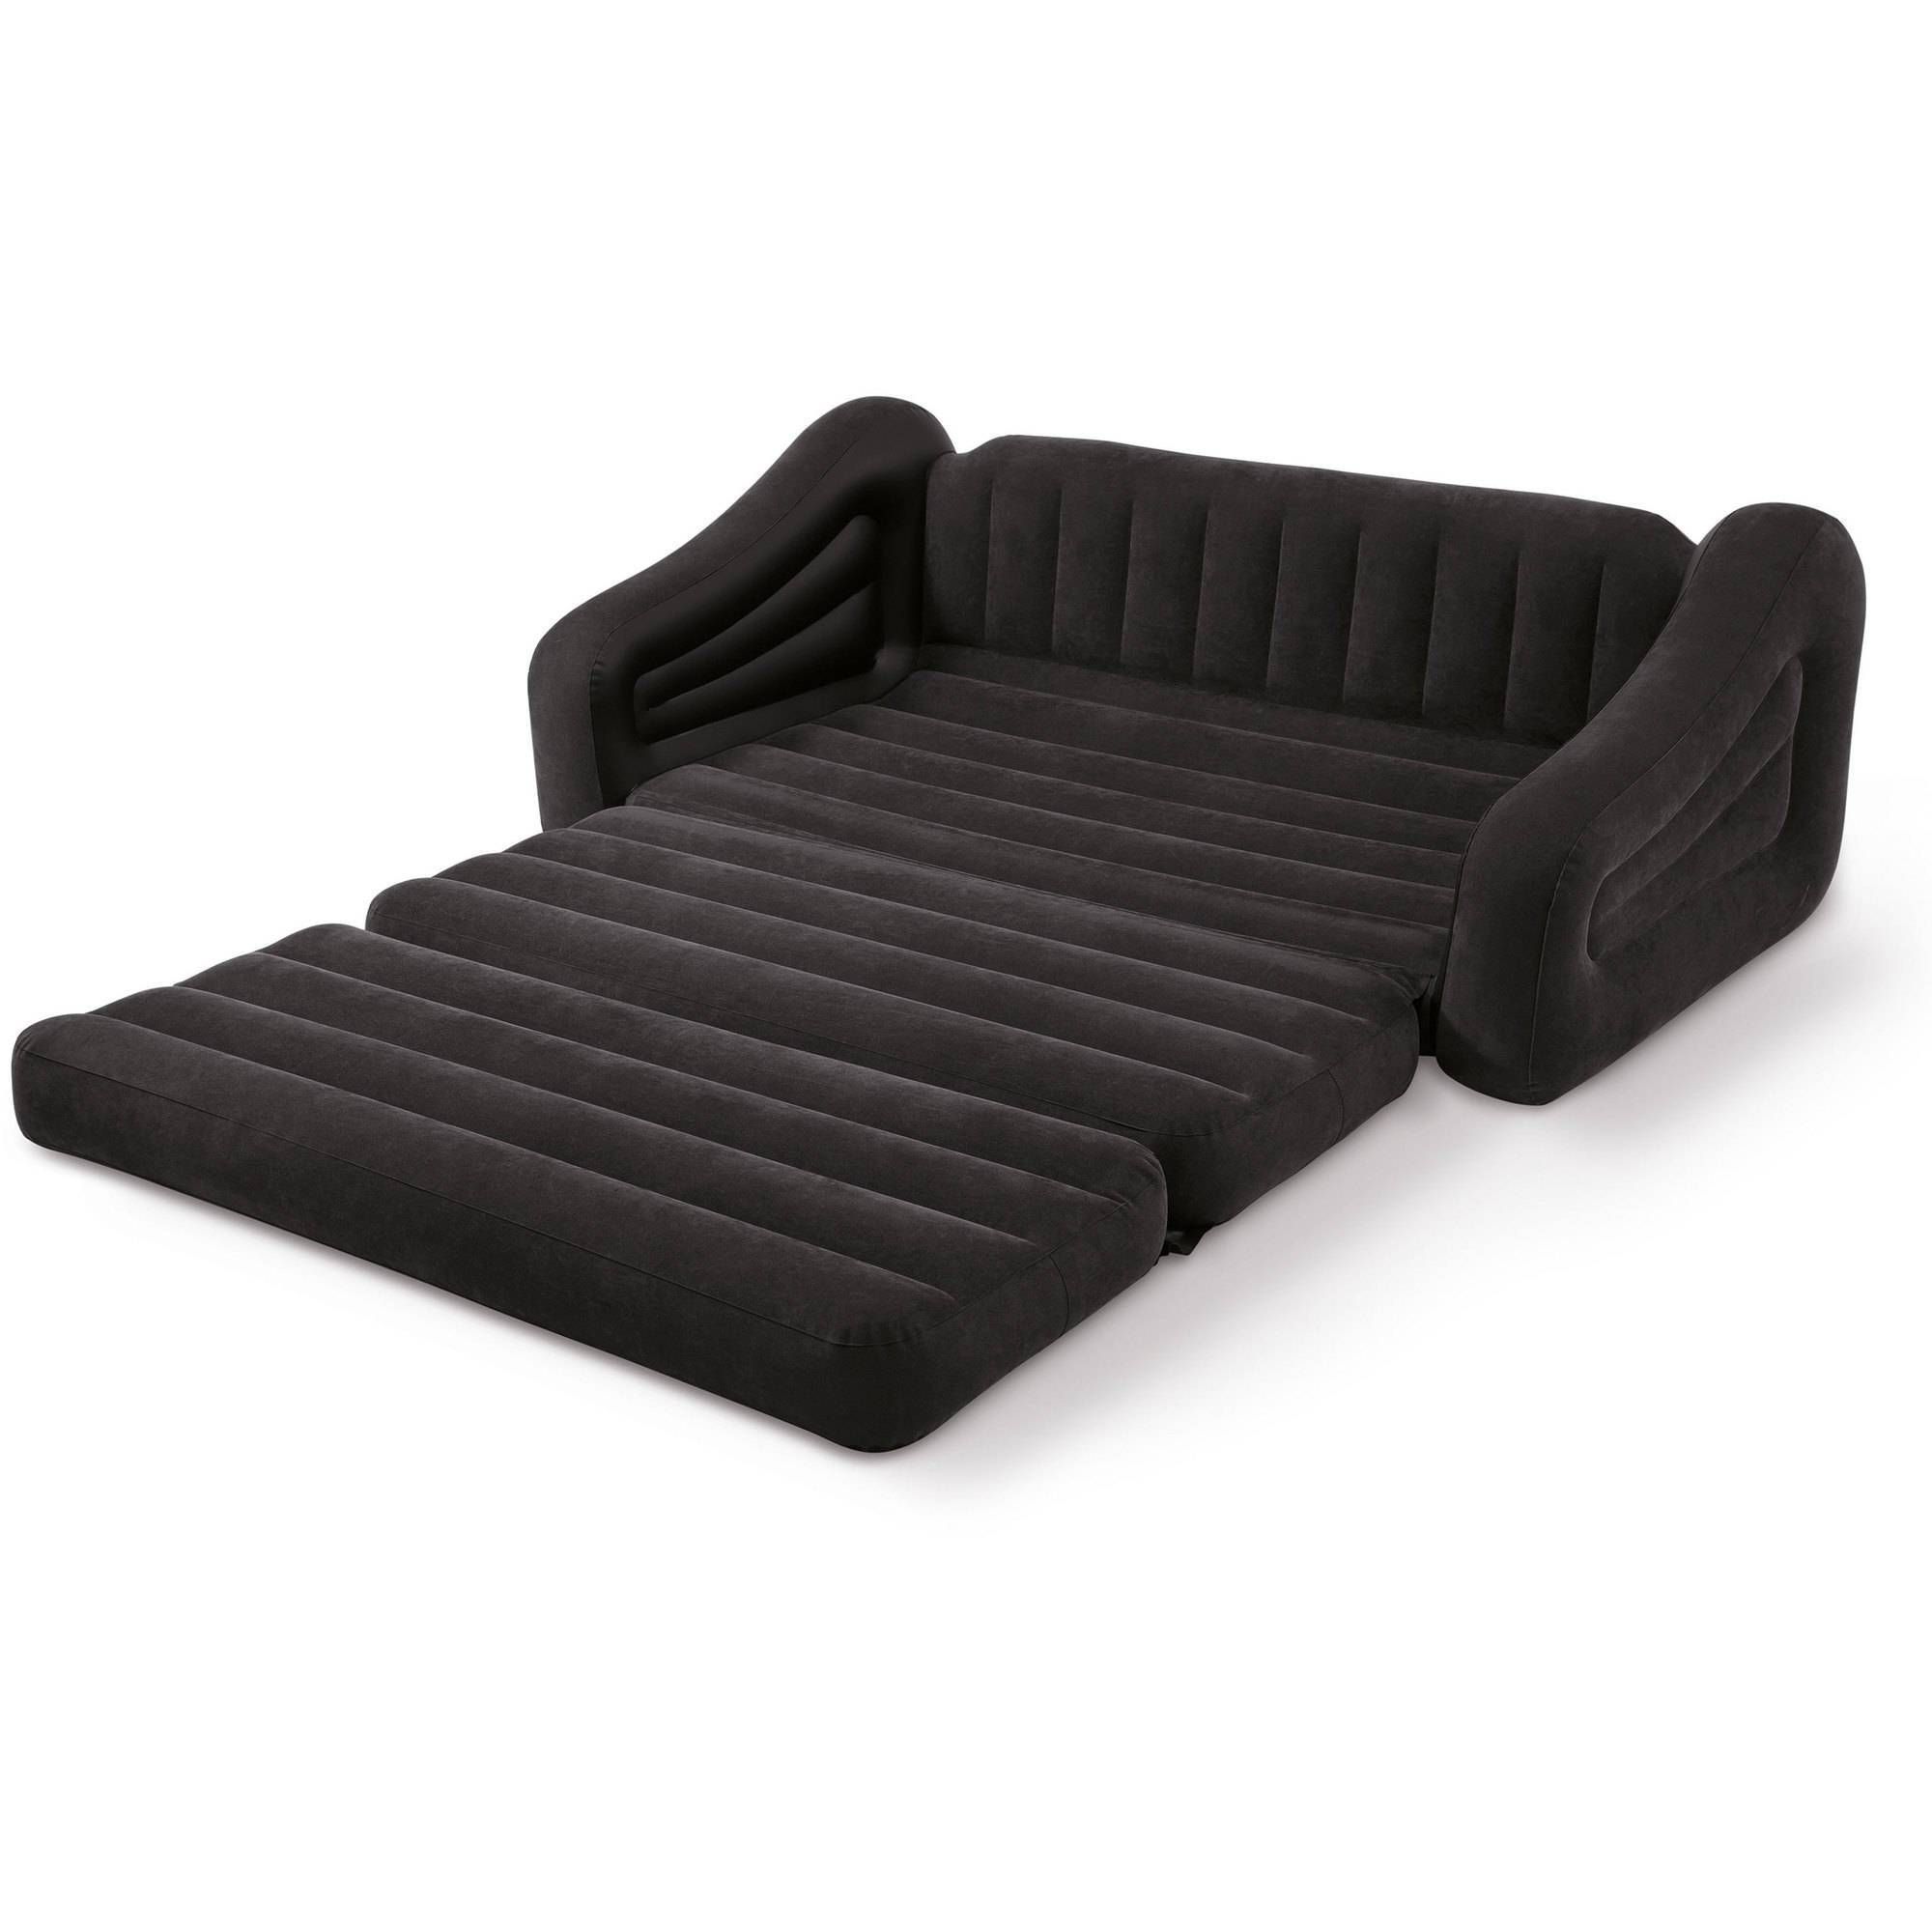 Intex Queen Inflatable Pull Out Sofa Bed – Walmart With Regard To Intex Pull Out Chairs (View 13 of 15)